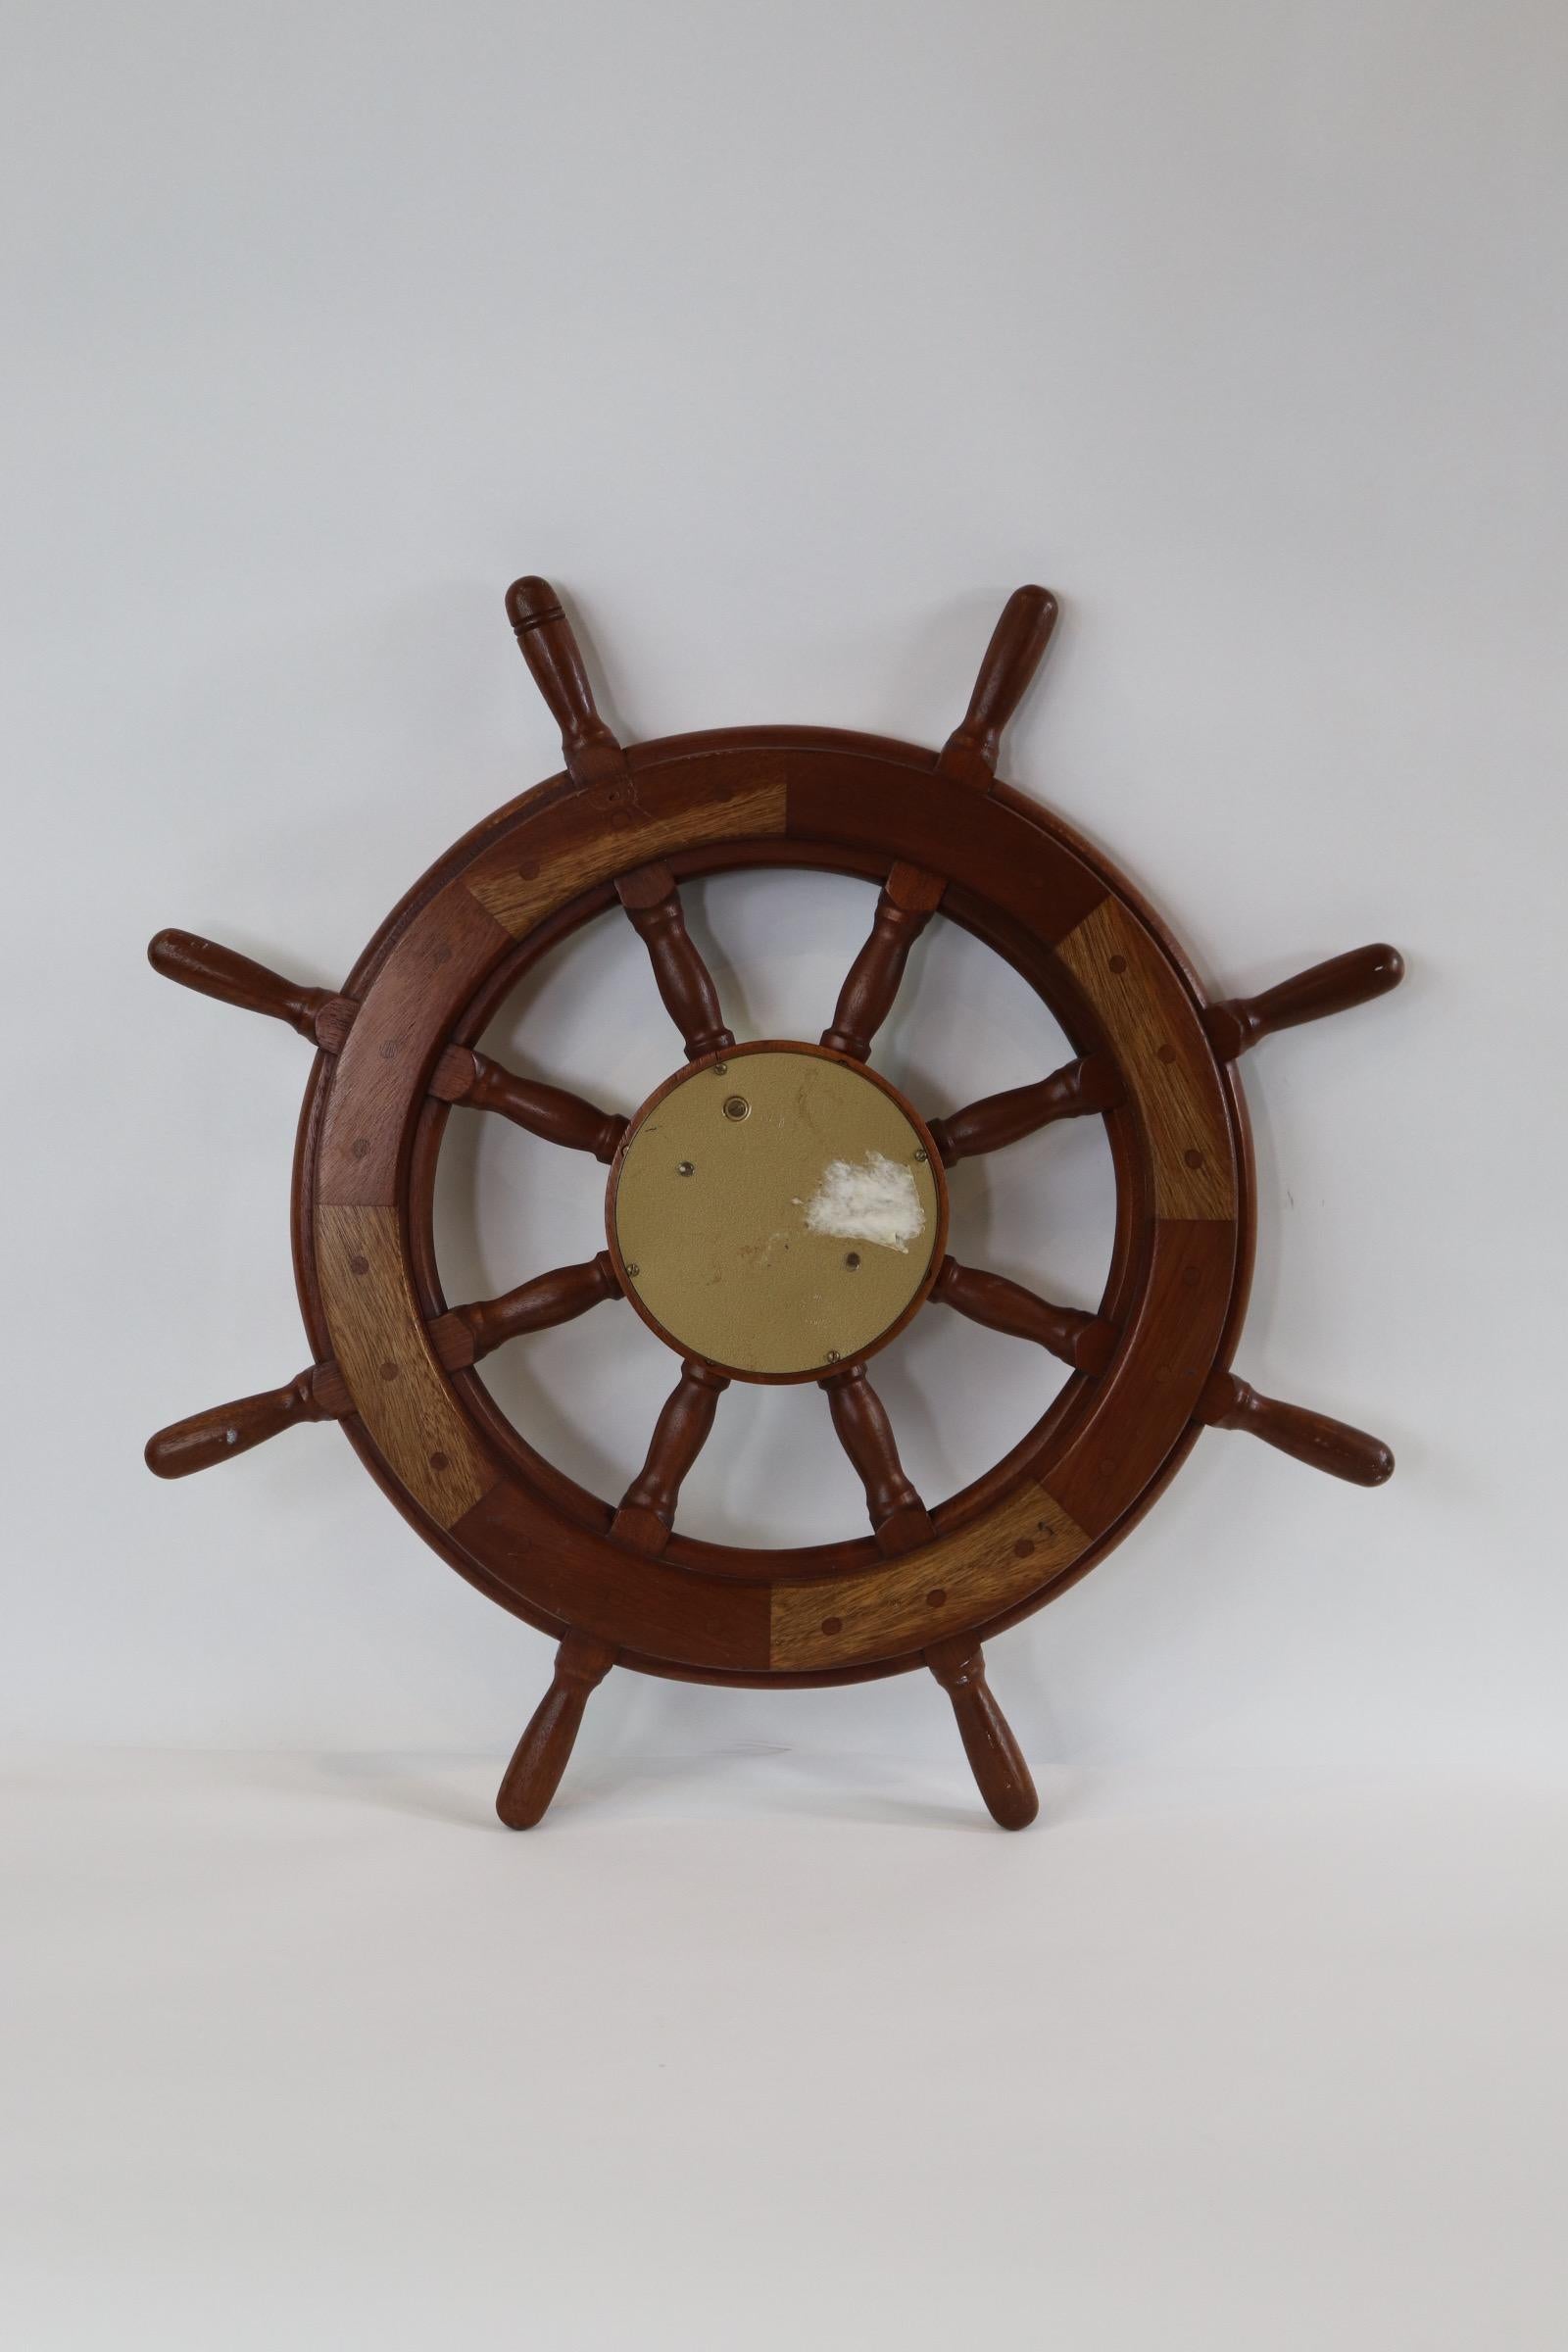 Eight spoke mahogany ships wheel with extensive Hollywood inlay and striking ships clock in brass case. Weight is 12 pounds.